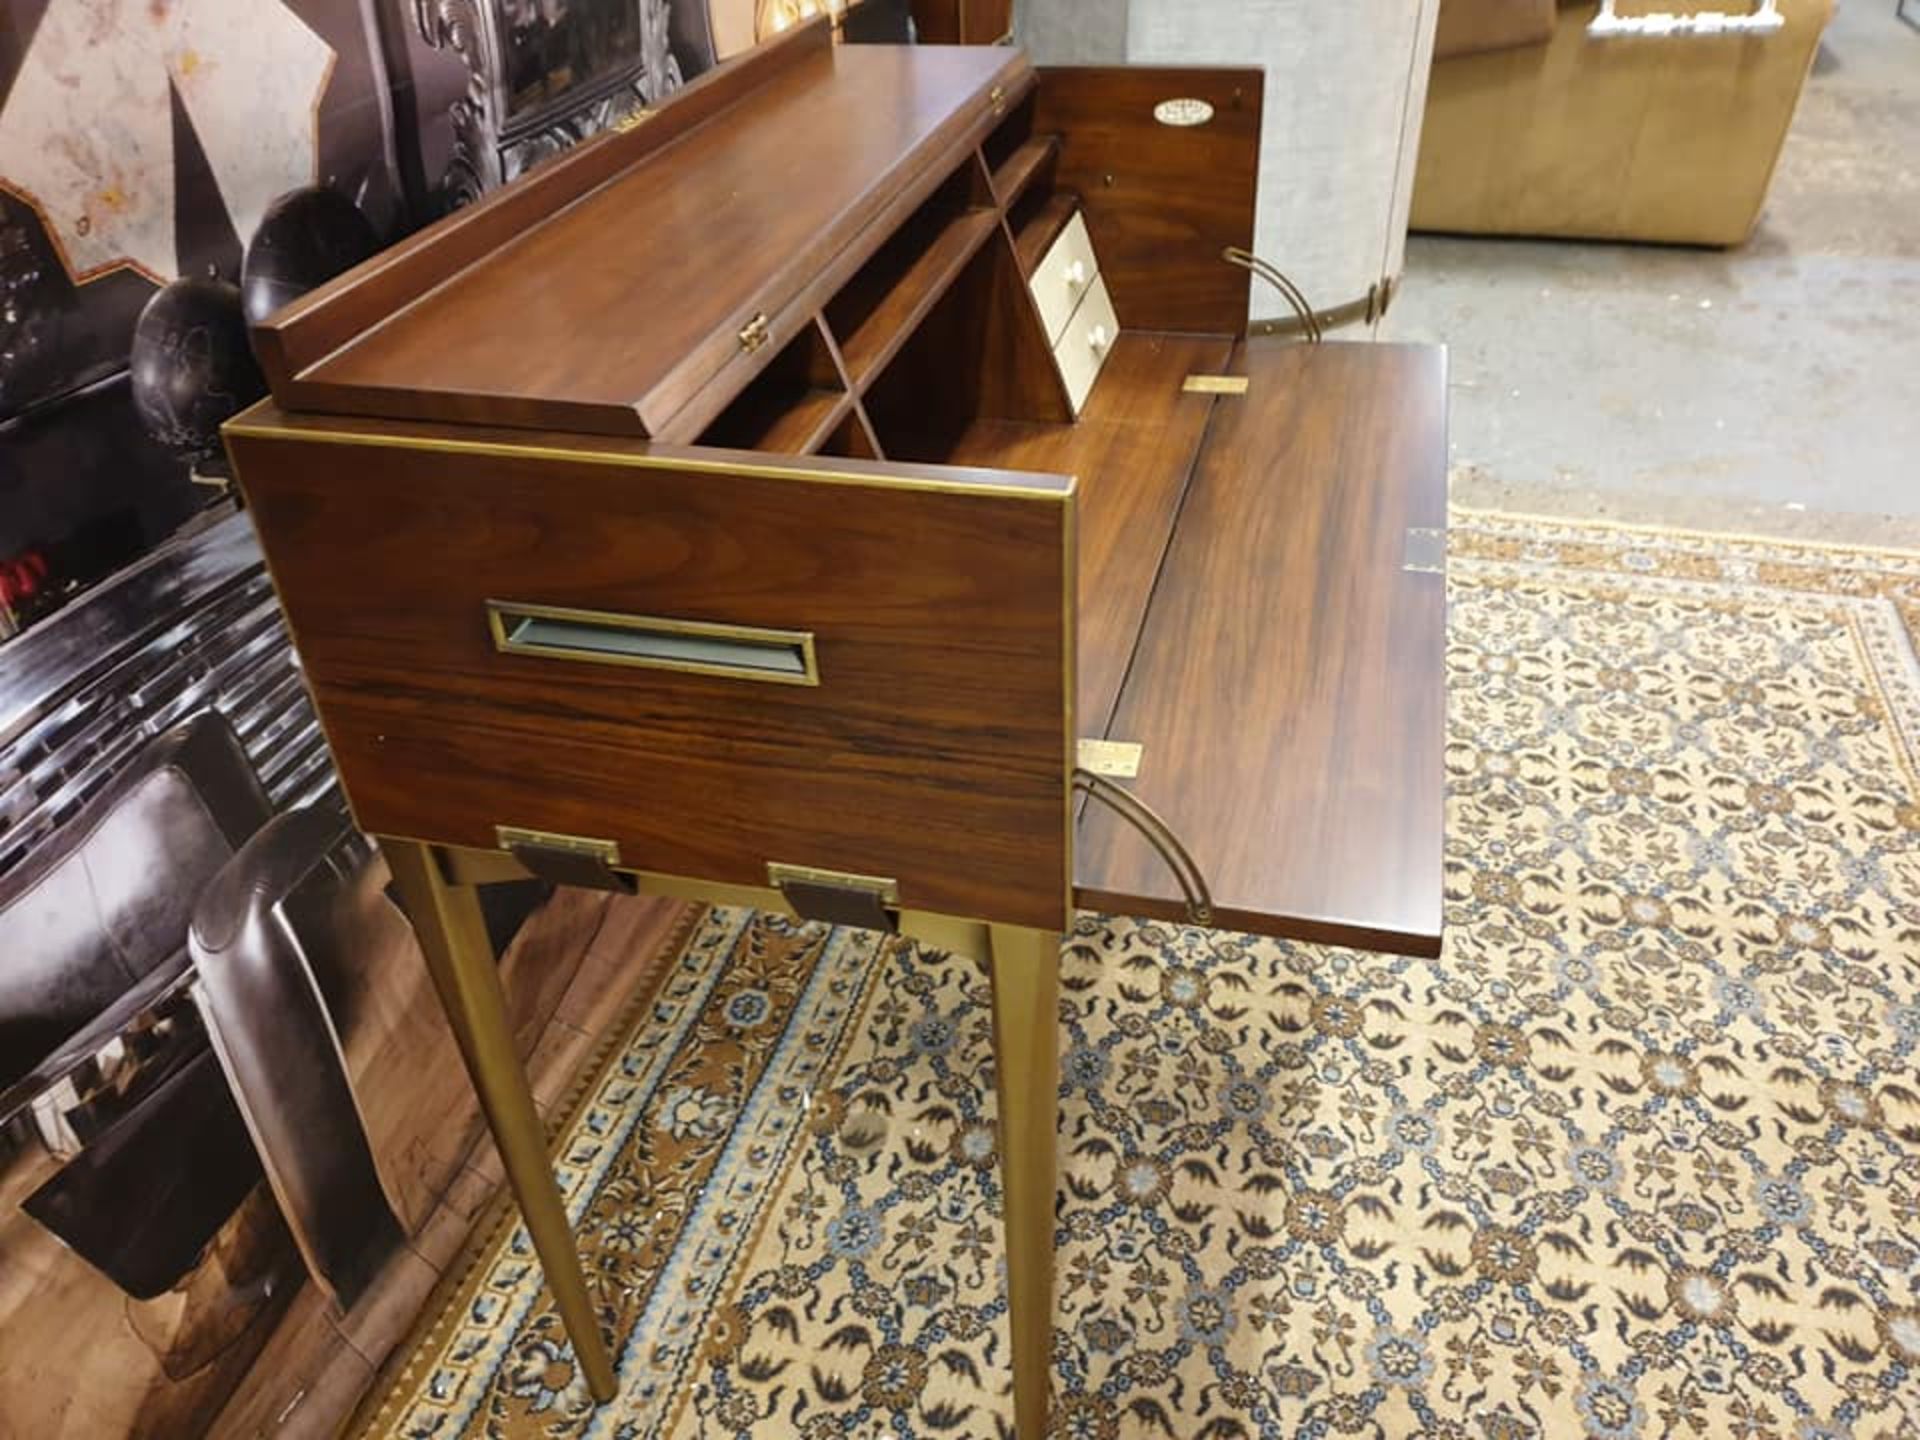 Starbay Acacia Walnut campaign writing desk with Brass trim and brass legs with leather strapping - Image 5 of 7